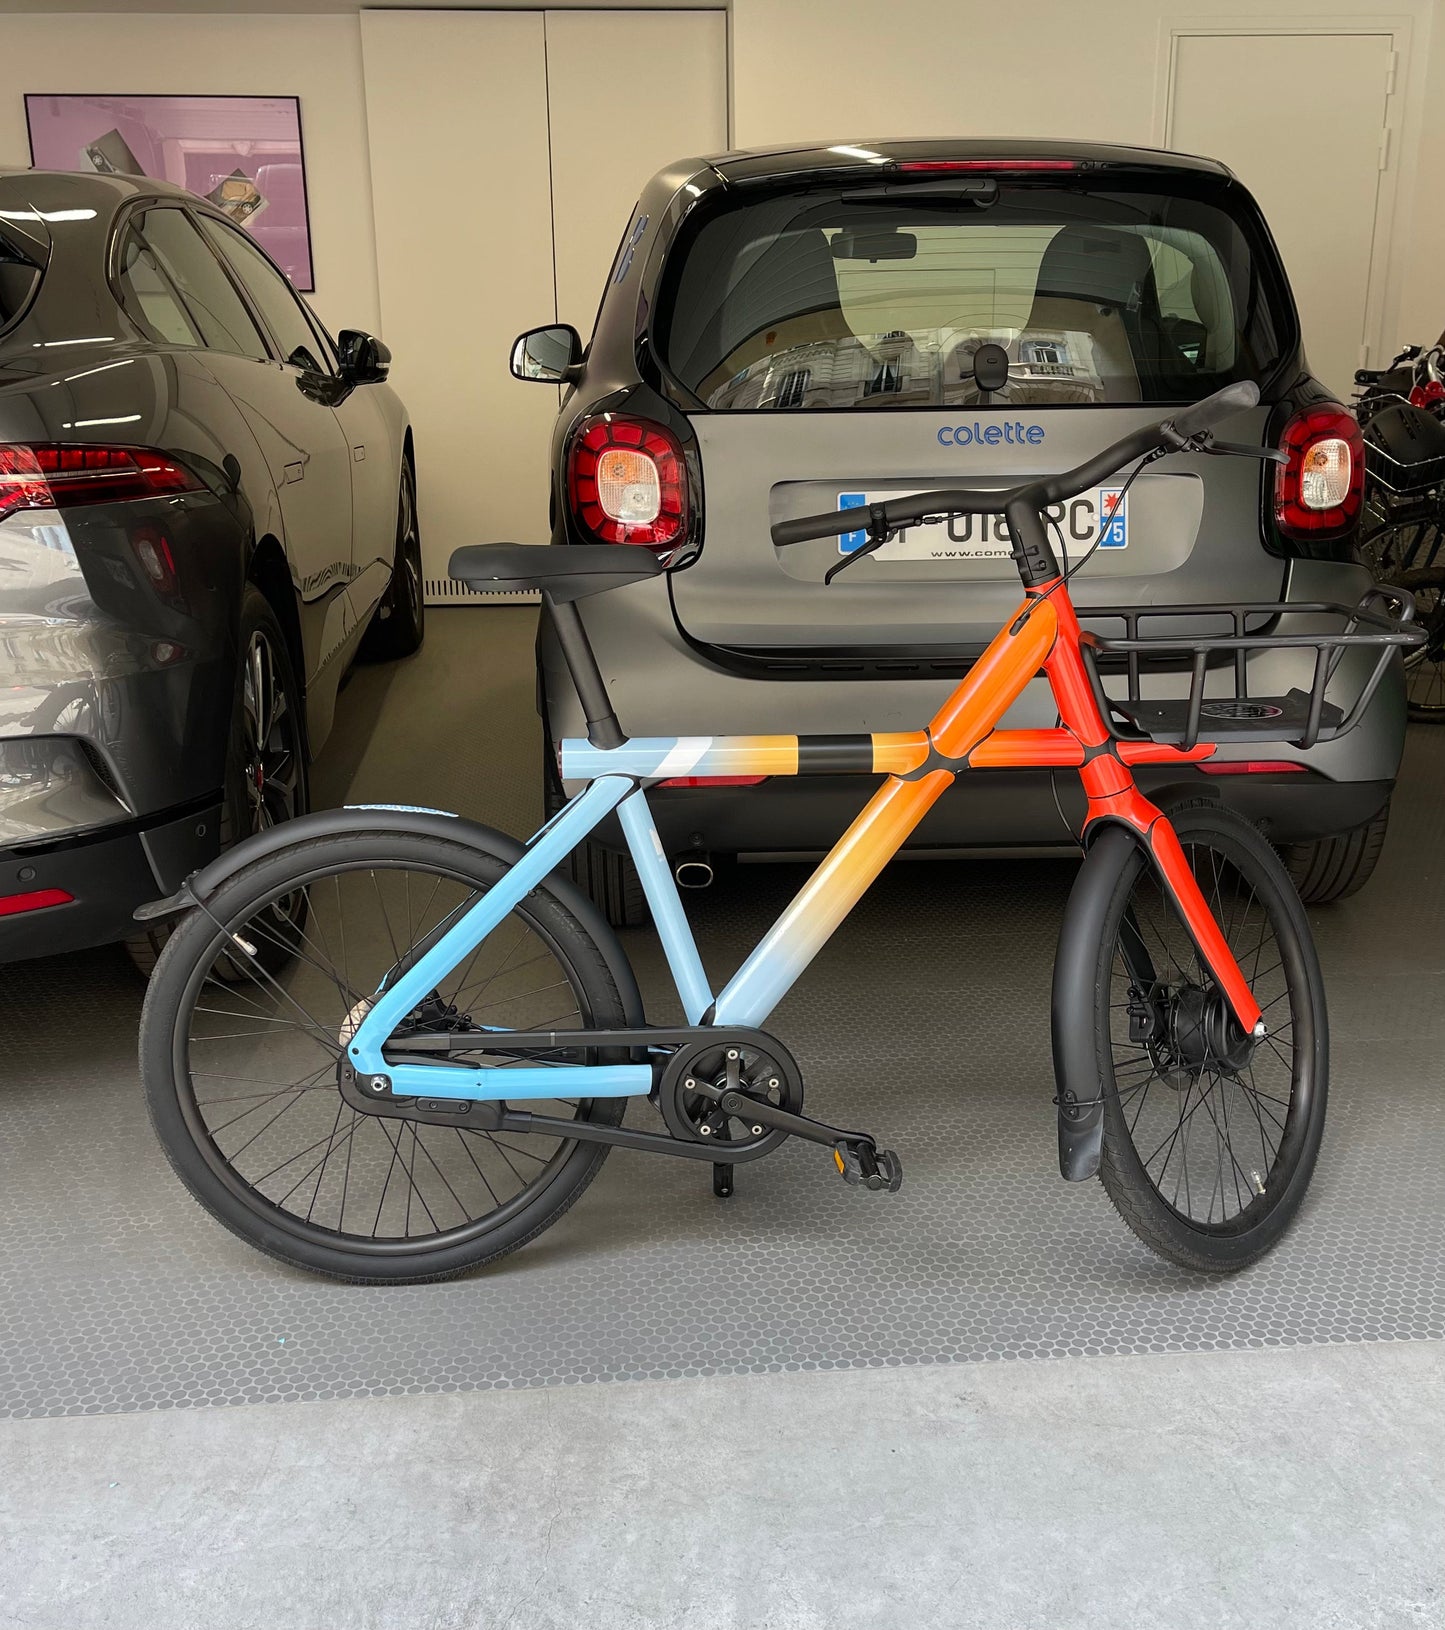 "BEHIND THE SKY" ORANGE - PROTECT KIT FOR VANMOOF X2